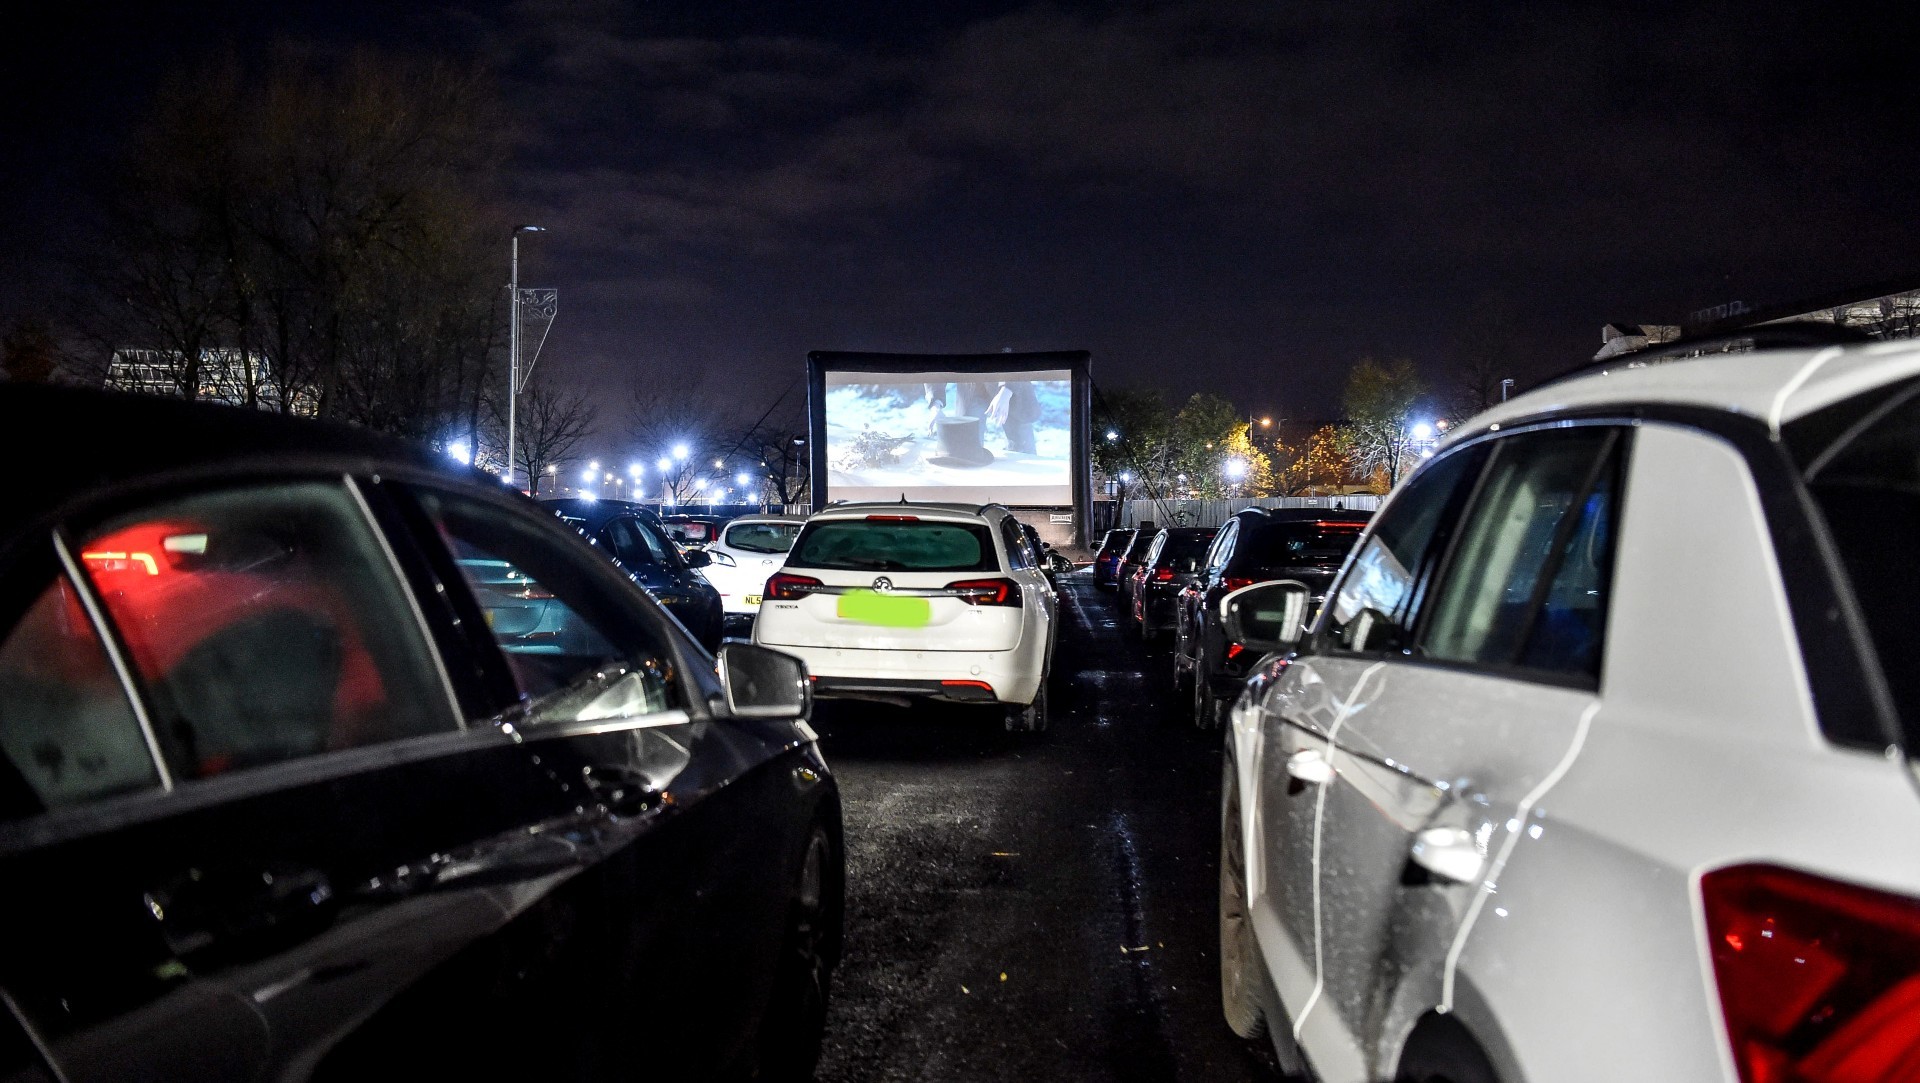 The drive-in cinema